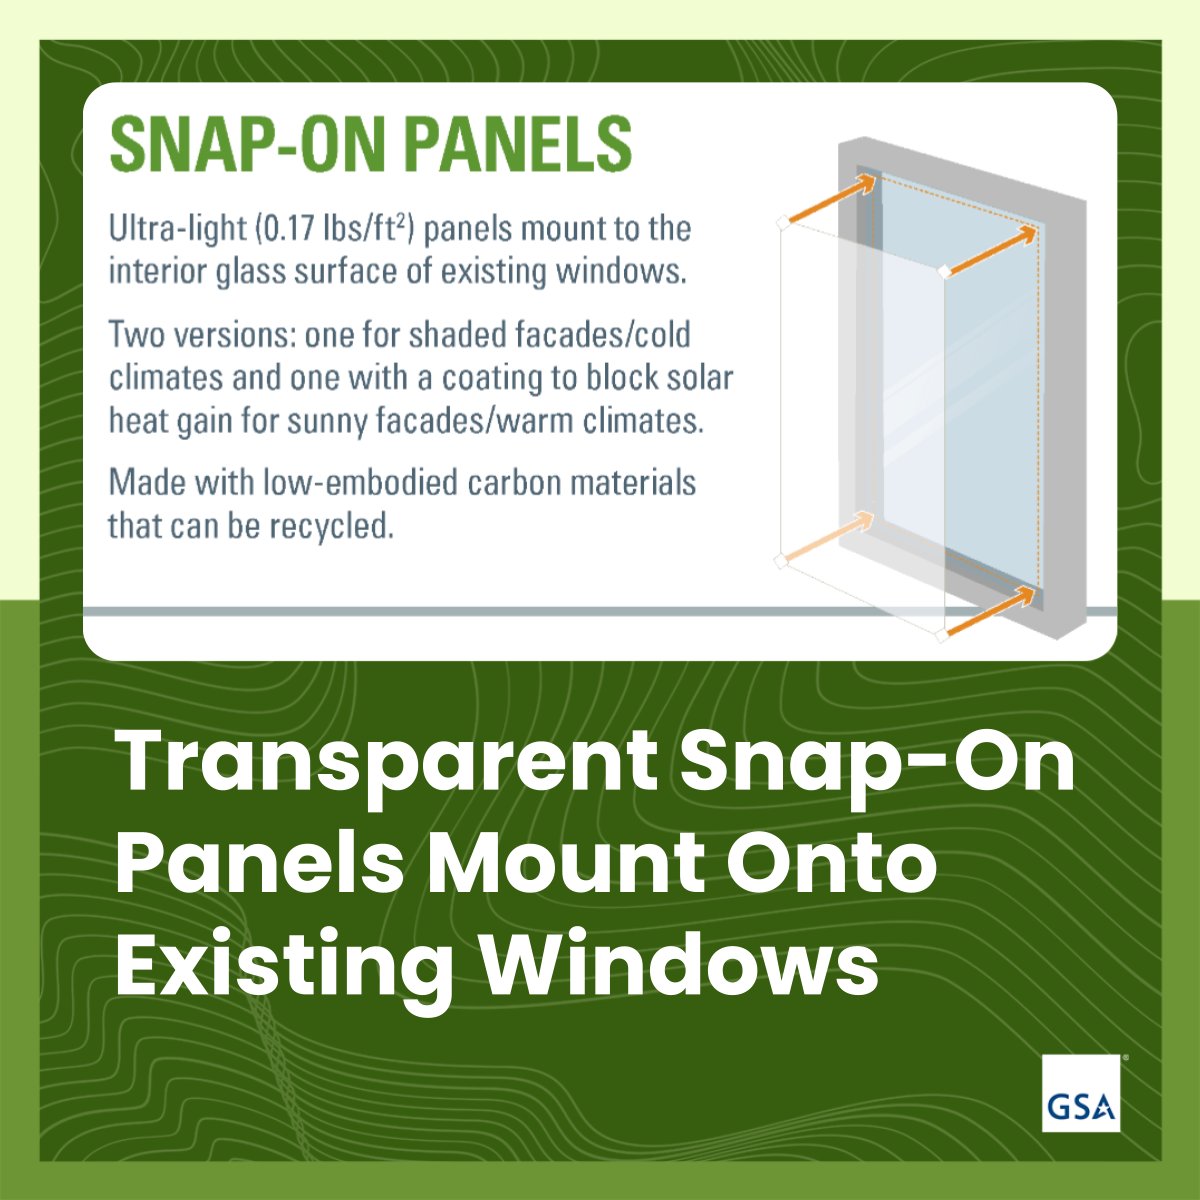 #HappeningToday Improve your building’s windows 🪟 performance without replacing them. Find out how by joining the webinar at 1:00 pm on “Ultralight Insulating Panels for Operable Windows.” shorturl.at/agosJ #GSAPBS #GSA #Lightpanels